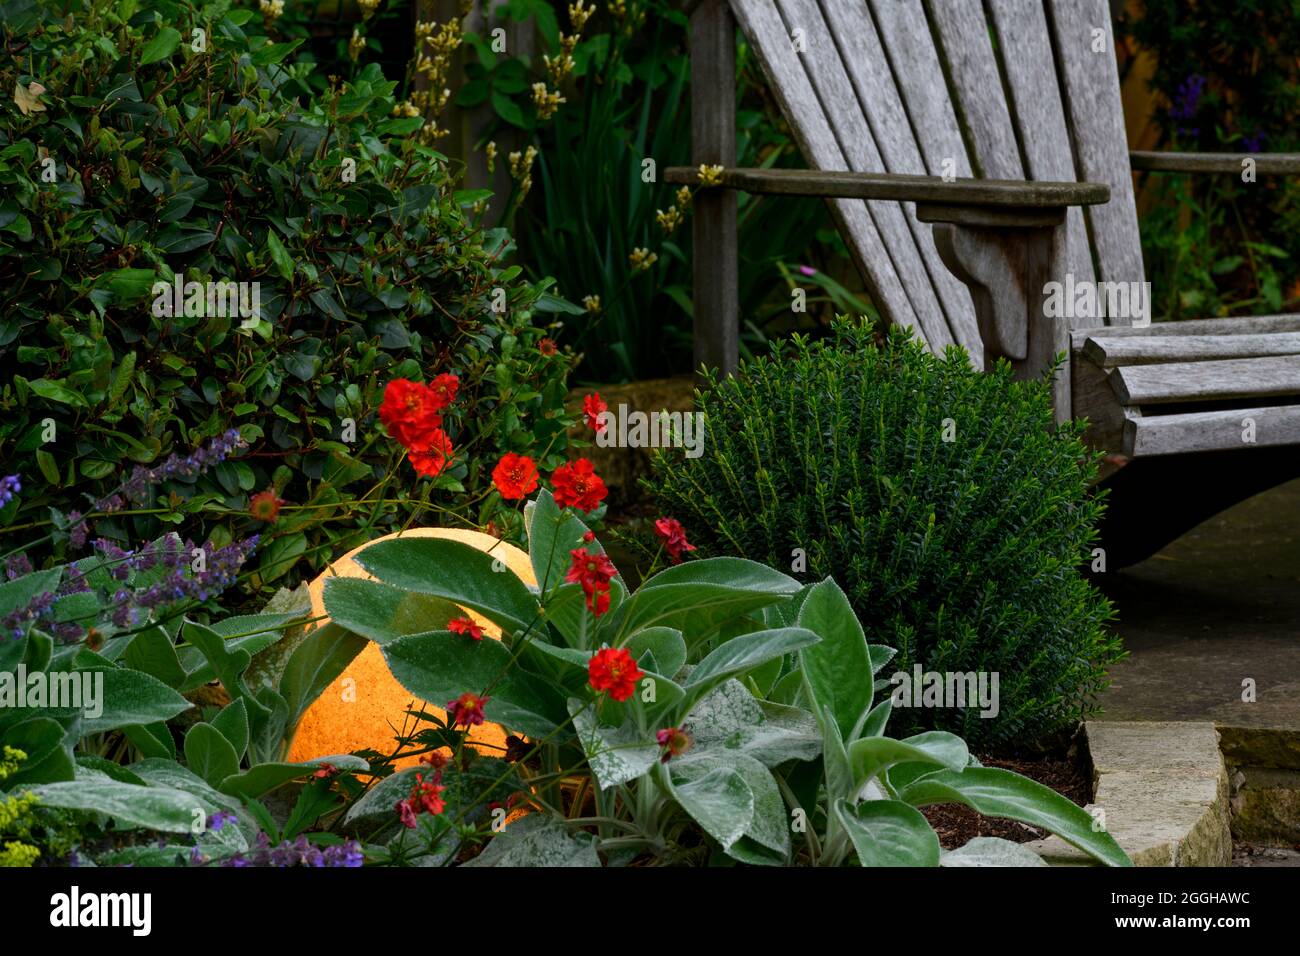 Stylish illuminated globe light lit up & glowing in dark, flowering plants & wooden seat in landscaped private garden at dusk - Yorkshire, England, UK Stock Photo